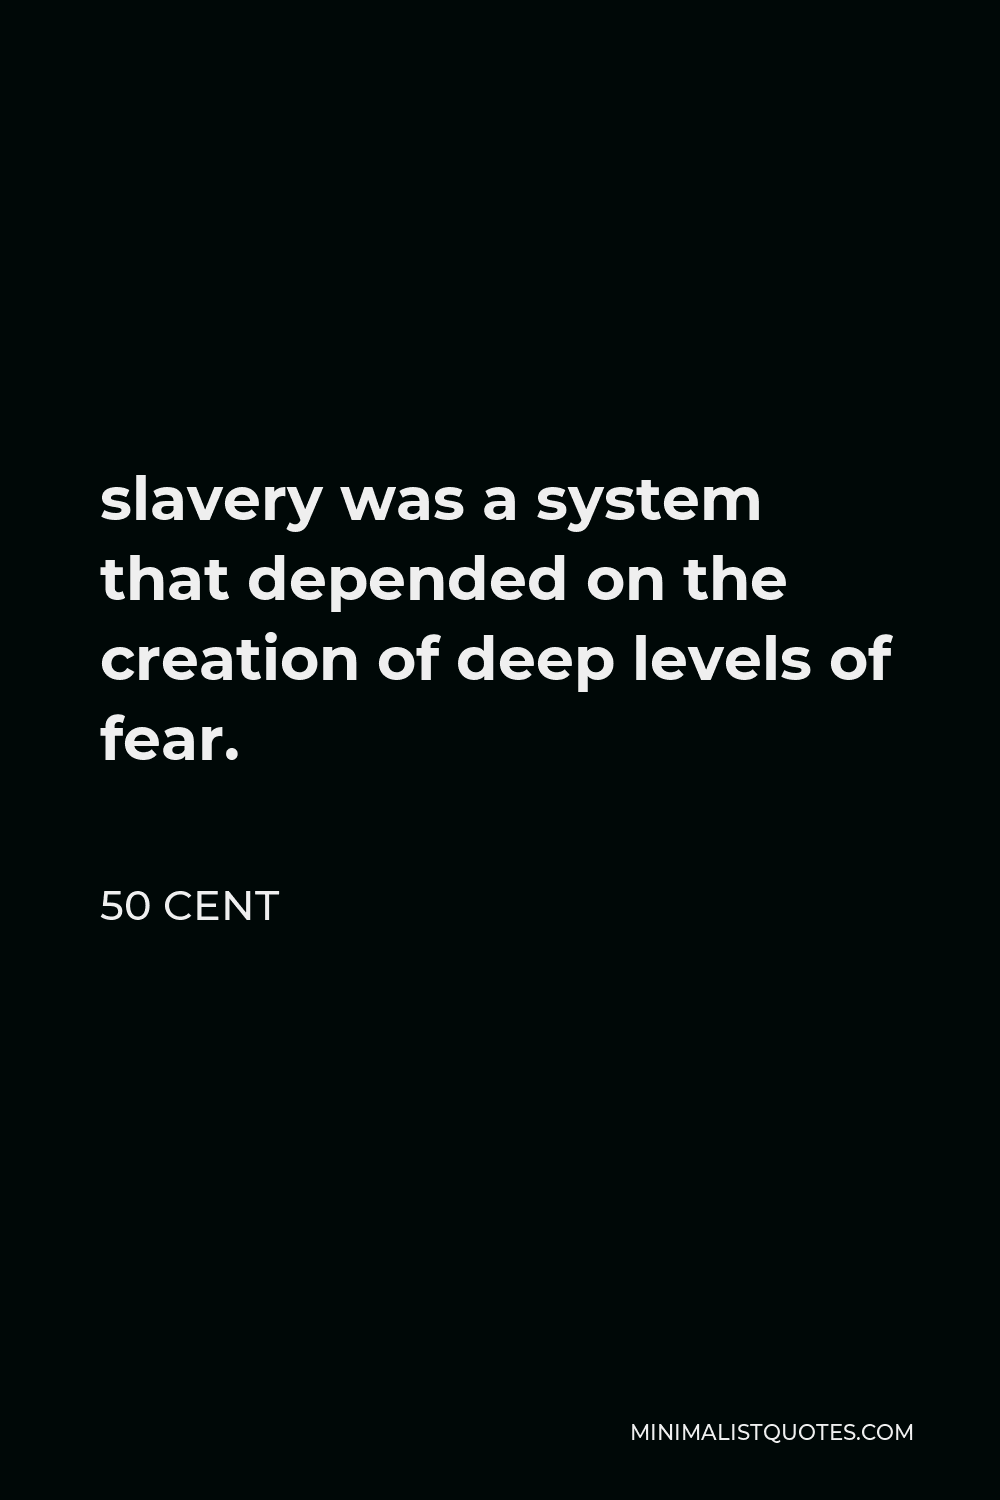 50 Cent Quote - slavery was a system that depended on the creation of deep levels of fear.